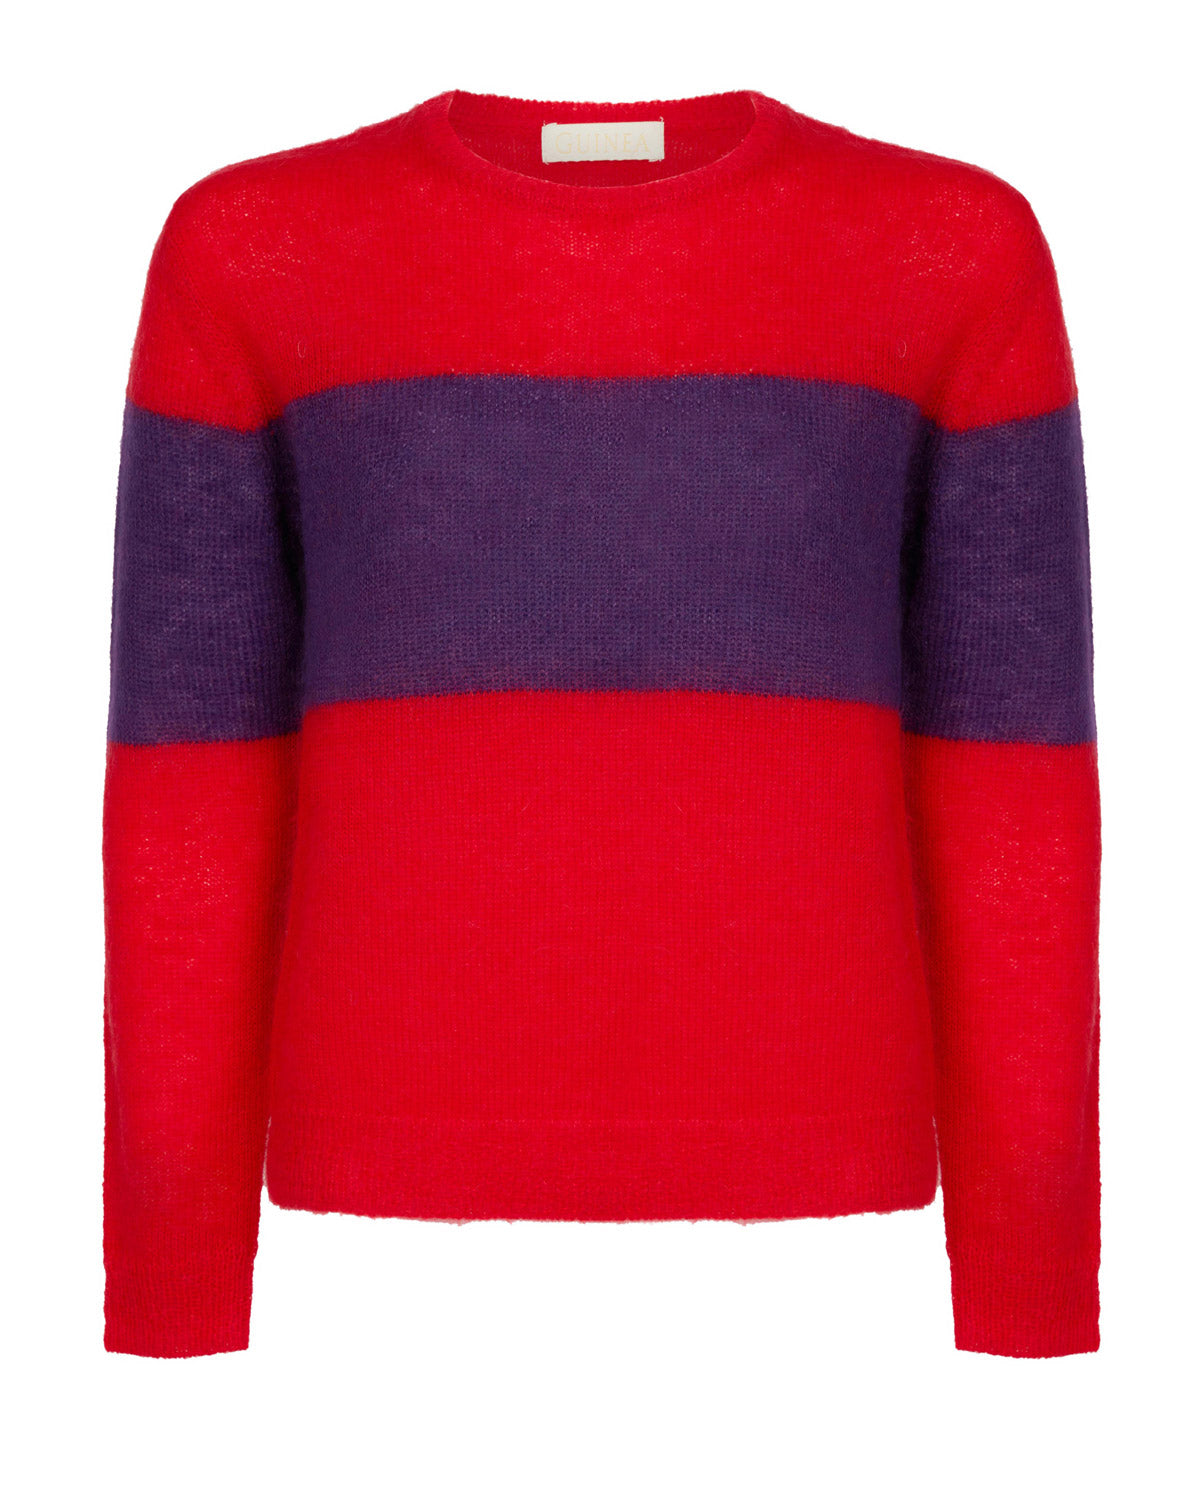 Milly - Red Mohair Jumper